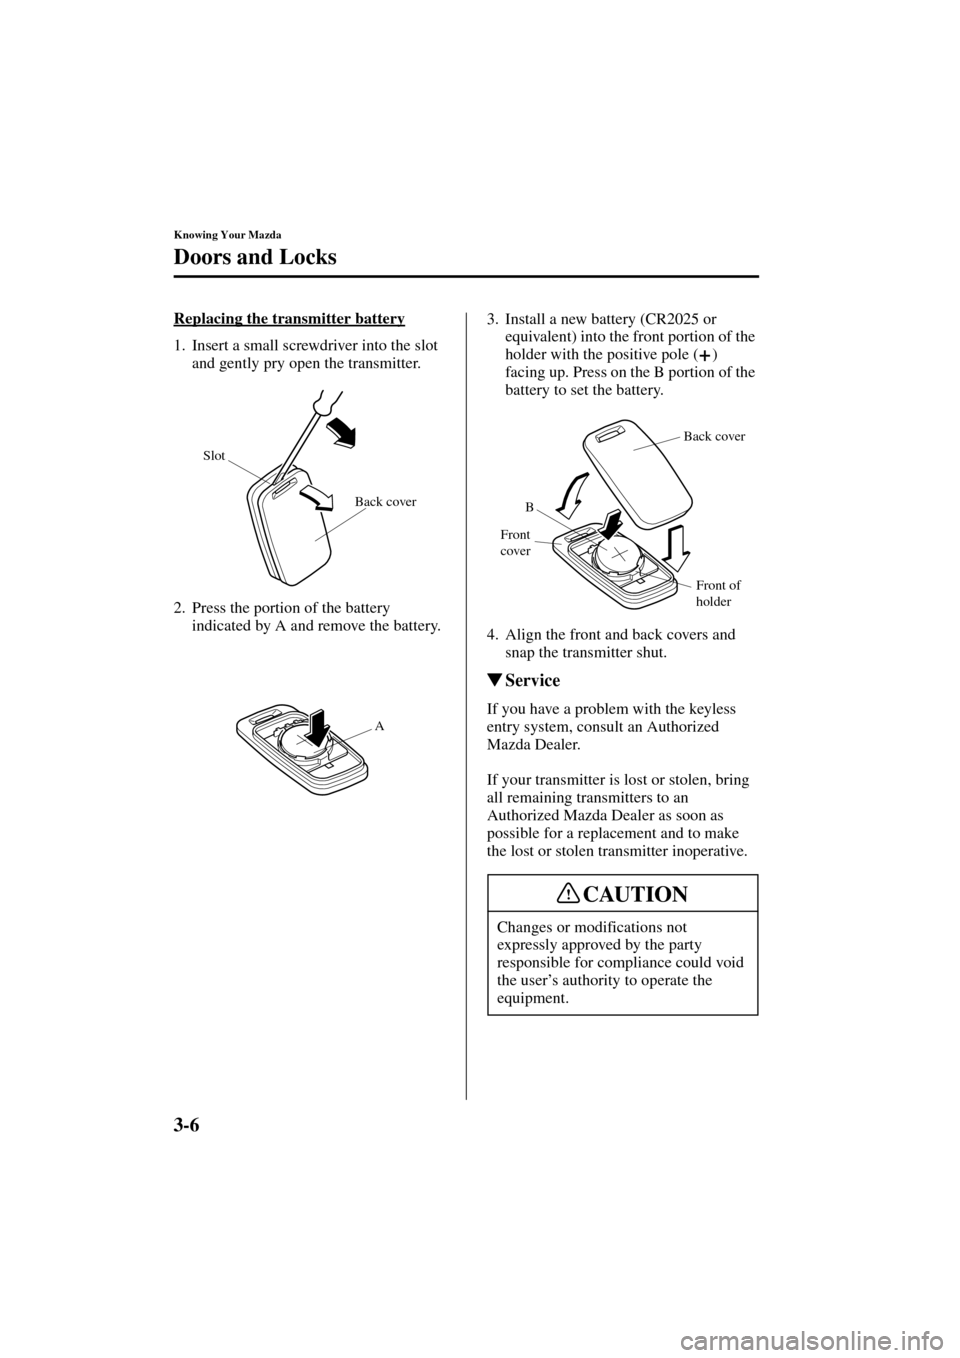 MAZDA MODEL 3 HATCHBACK 2004  Owners Manual (in English) 3-6
Knowing Your Mazda
Doors and Locks
Form No. 8S18-EA-03I
Replacing the transmitter battery
1. Insert a small screwdriver into the slot 
and gently pry open the transmitter.
2. Press the portion of 